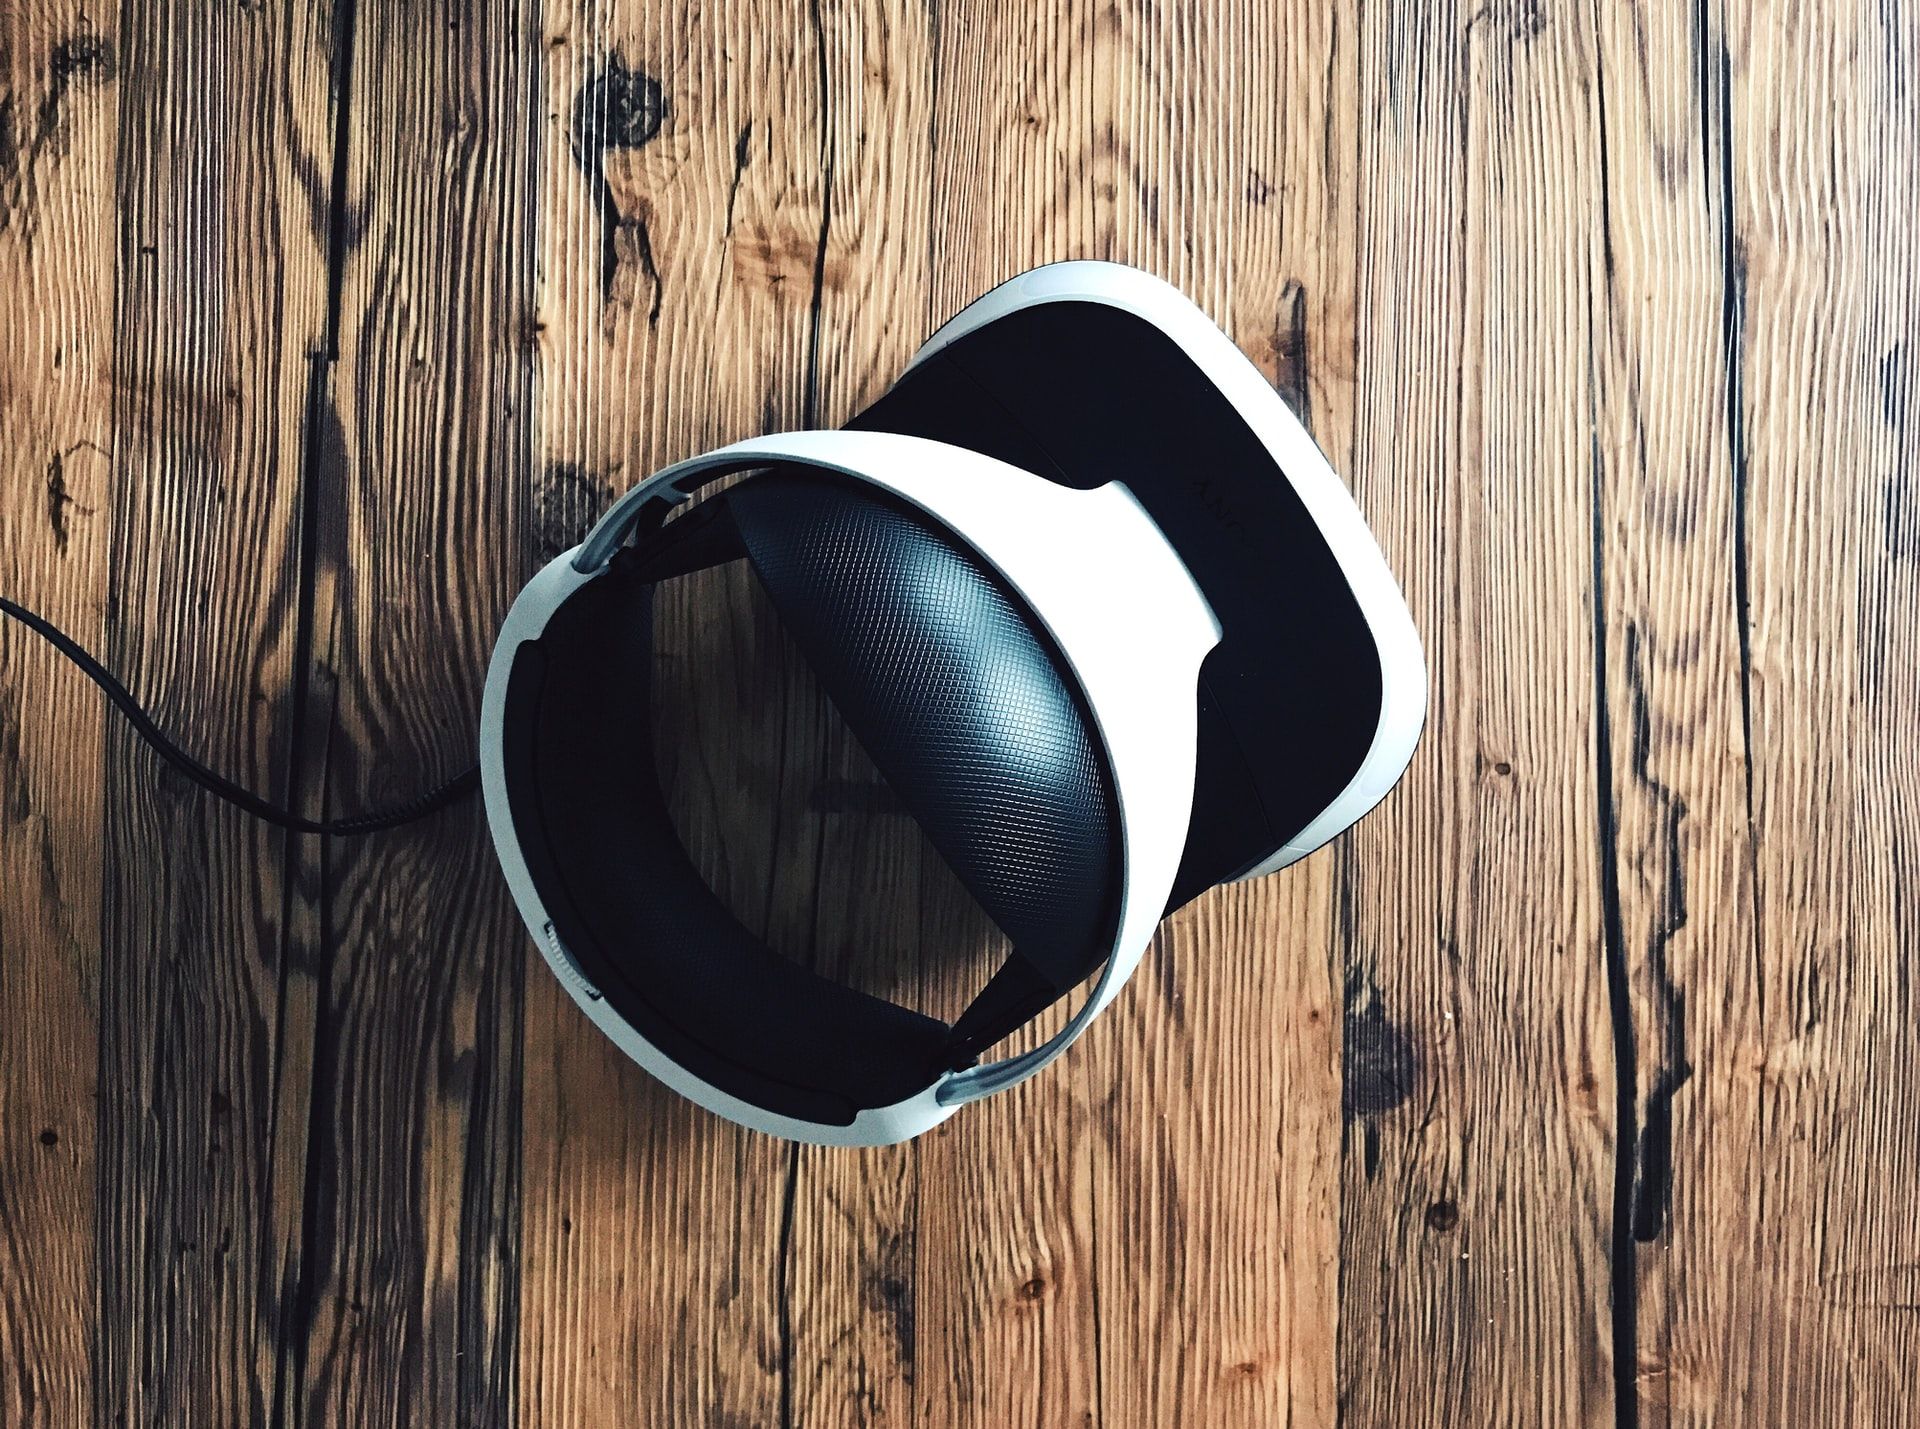 Image of the PS VR against a wooden background